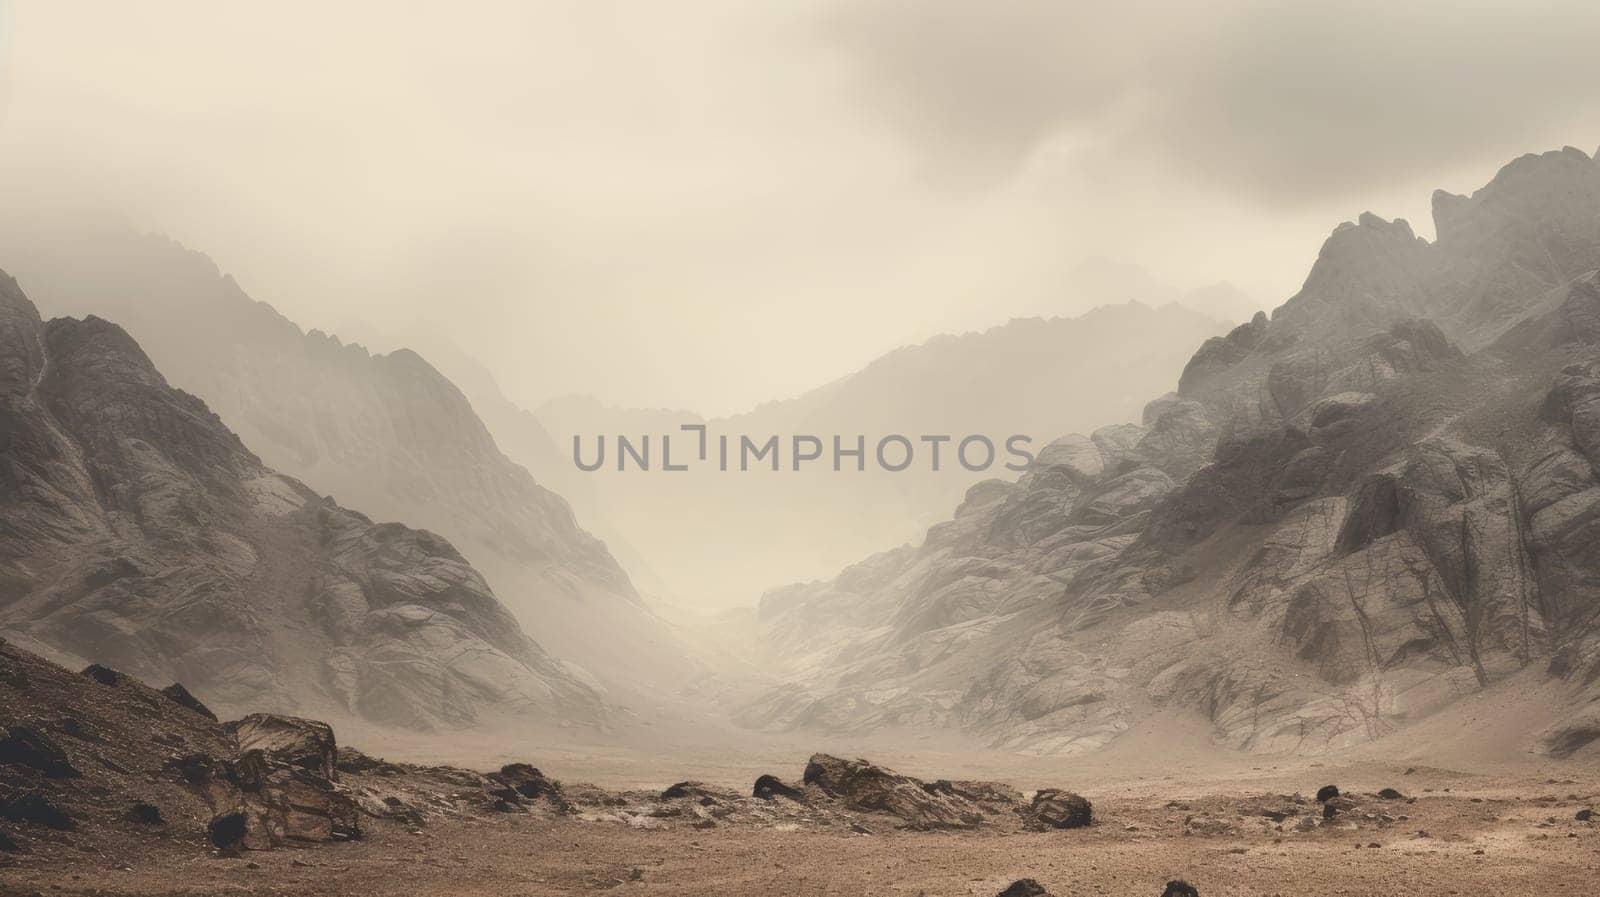 Landscape of mountains and rocks in the desert. Beautiful landscape, picture, phone screensaver, copy space, advertising, travel agency, tourism, solitude with nature, without people